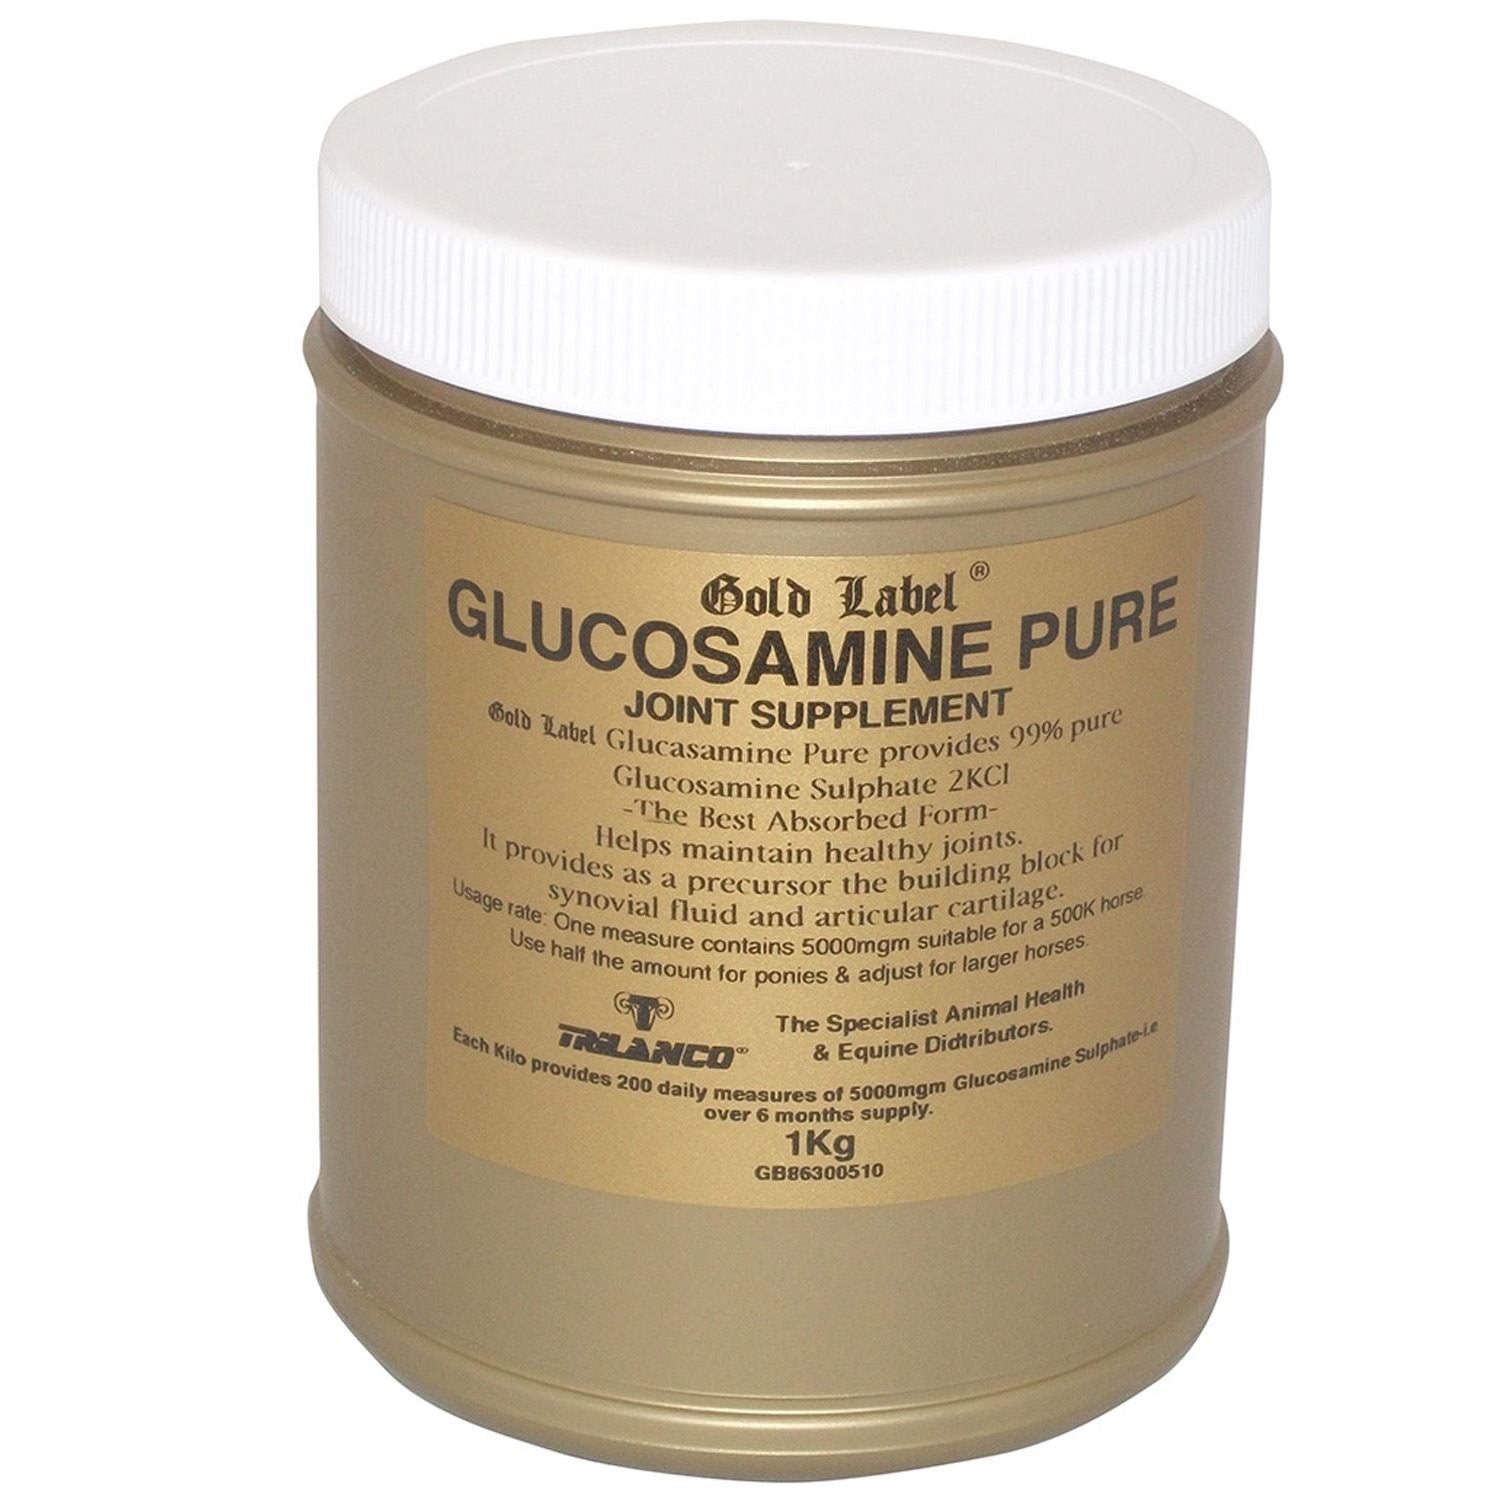 Gold Label Glucosamine Pure - Just Horse Riders